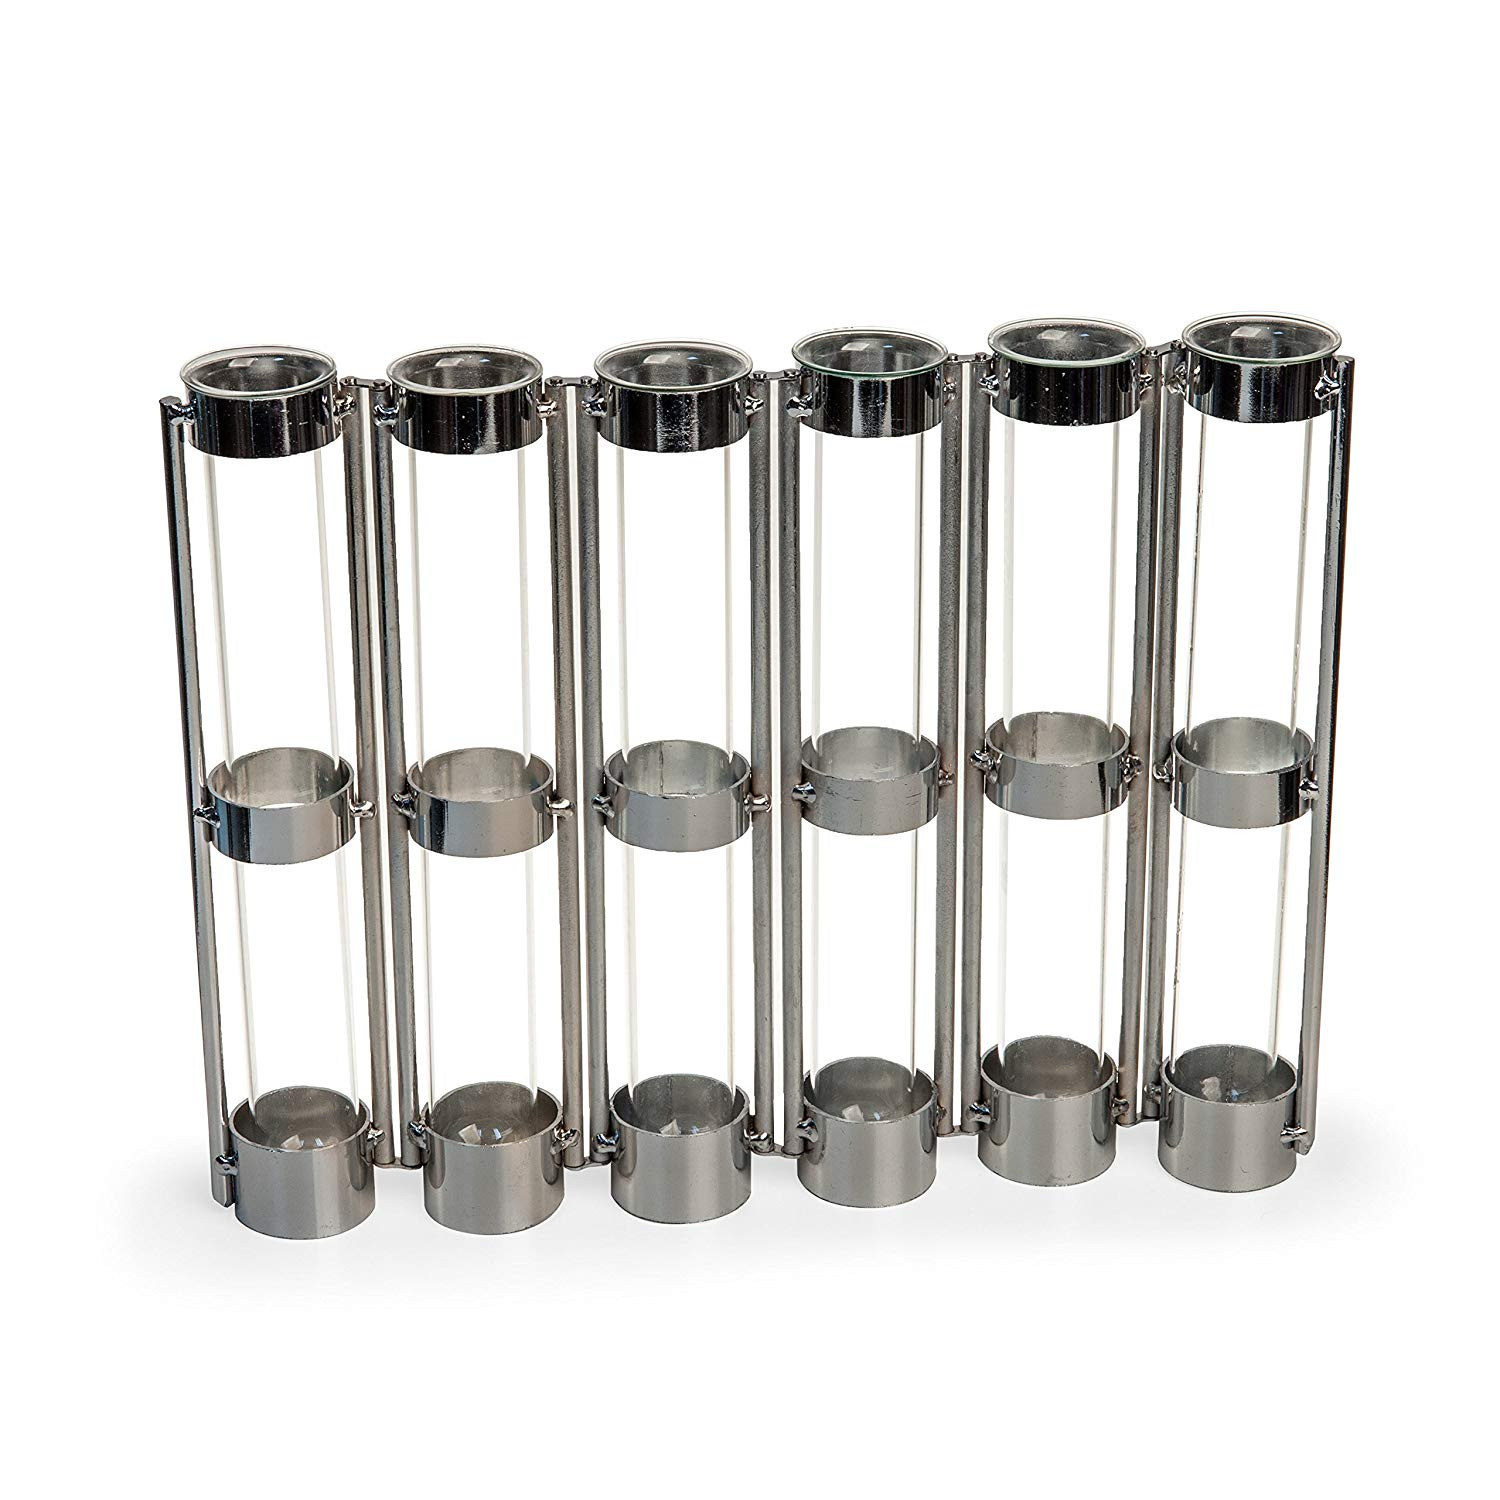 14 Amazing Test Tube Vase with Stand 2024 free download test tube vase with stand of amazon com danya b metallic six tube hinged bud vase in silver regarding amazon com danya b metallic six tube hinged bud vase in silver finish home kitchen